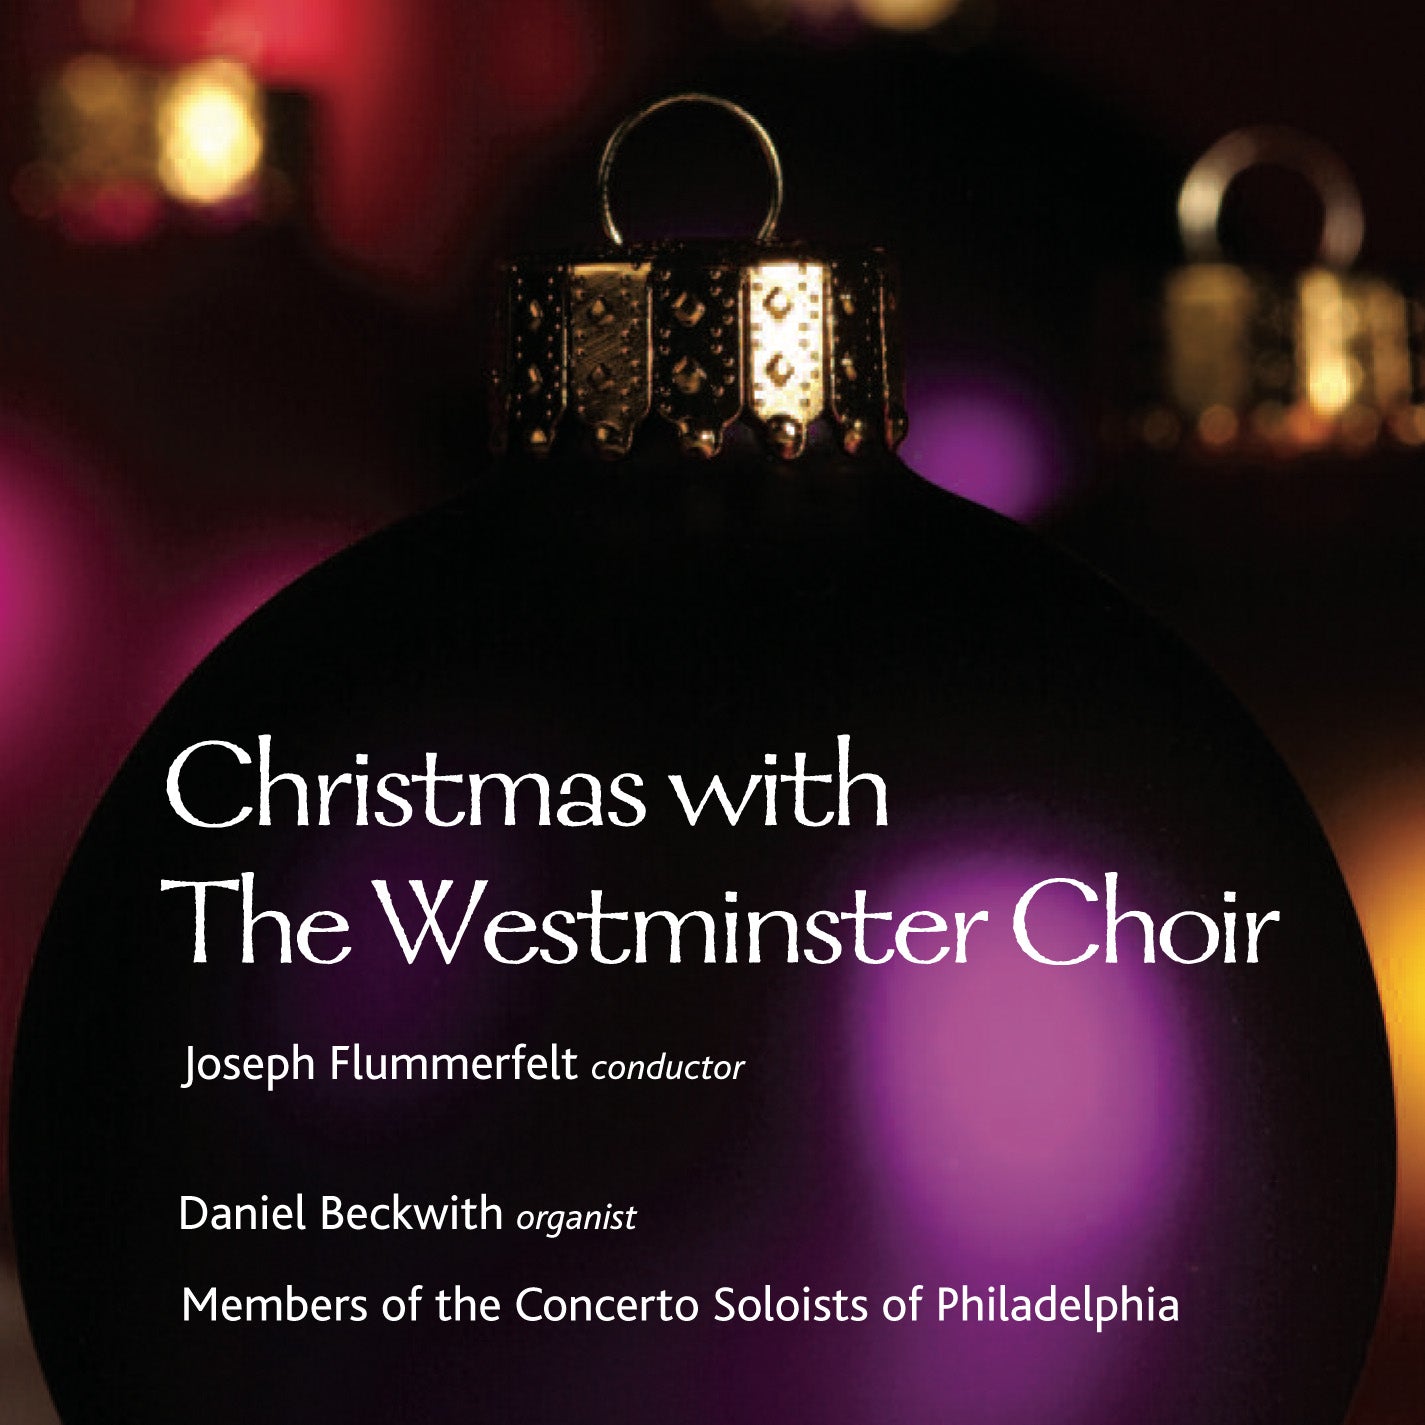 Christmas with The Westminster Choir